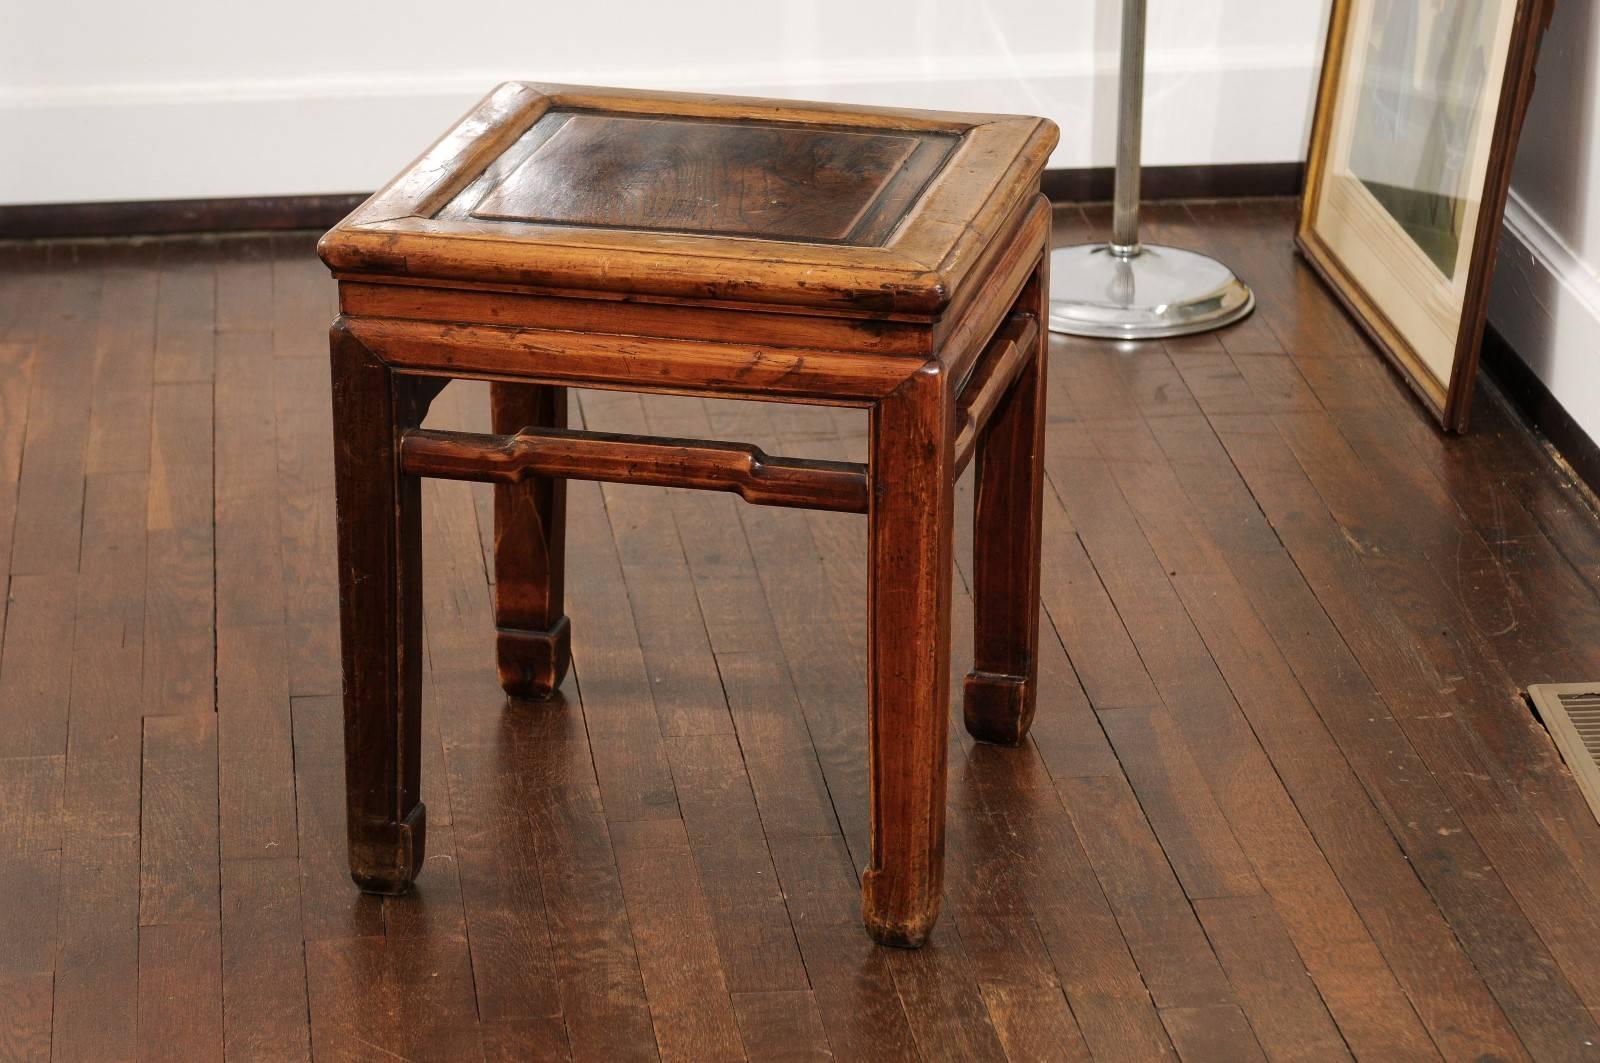 Wood Qing Dynasty Stool or Low Table